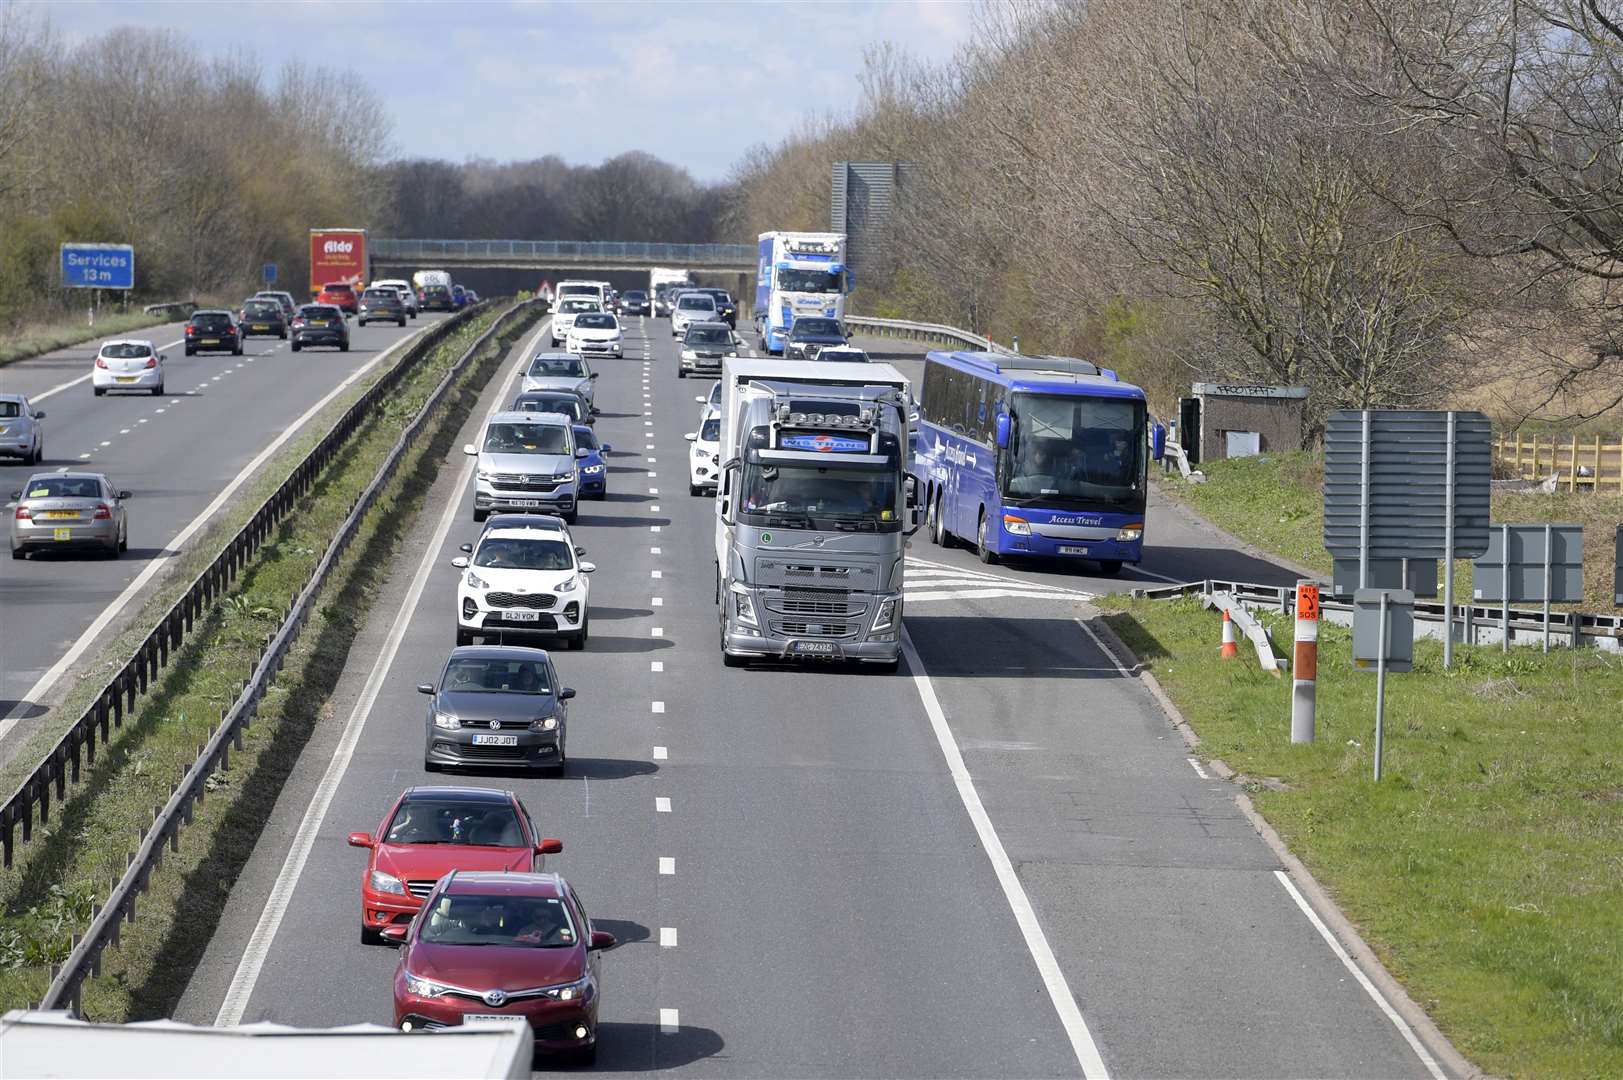 The full closure of the M2 will not take place this weekend